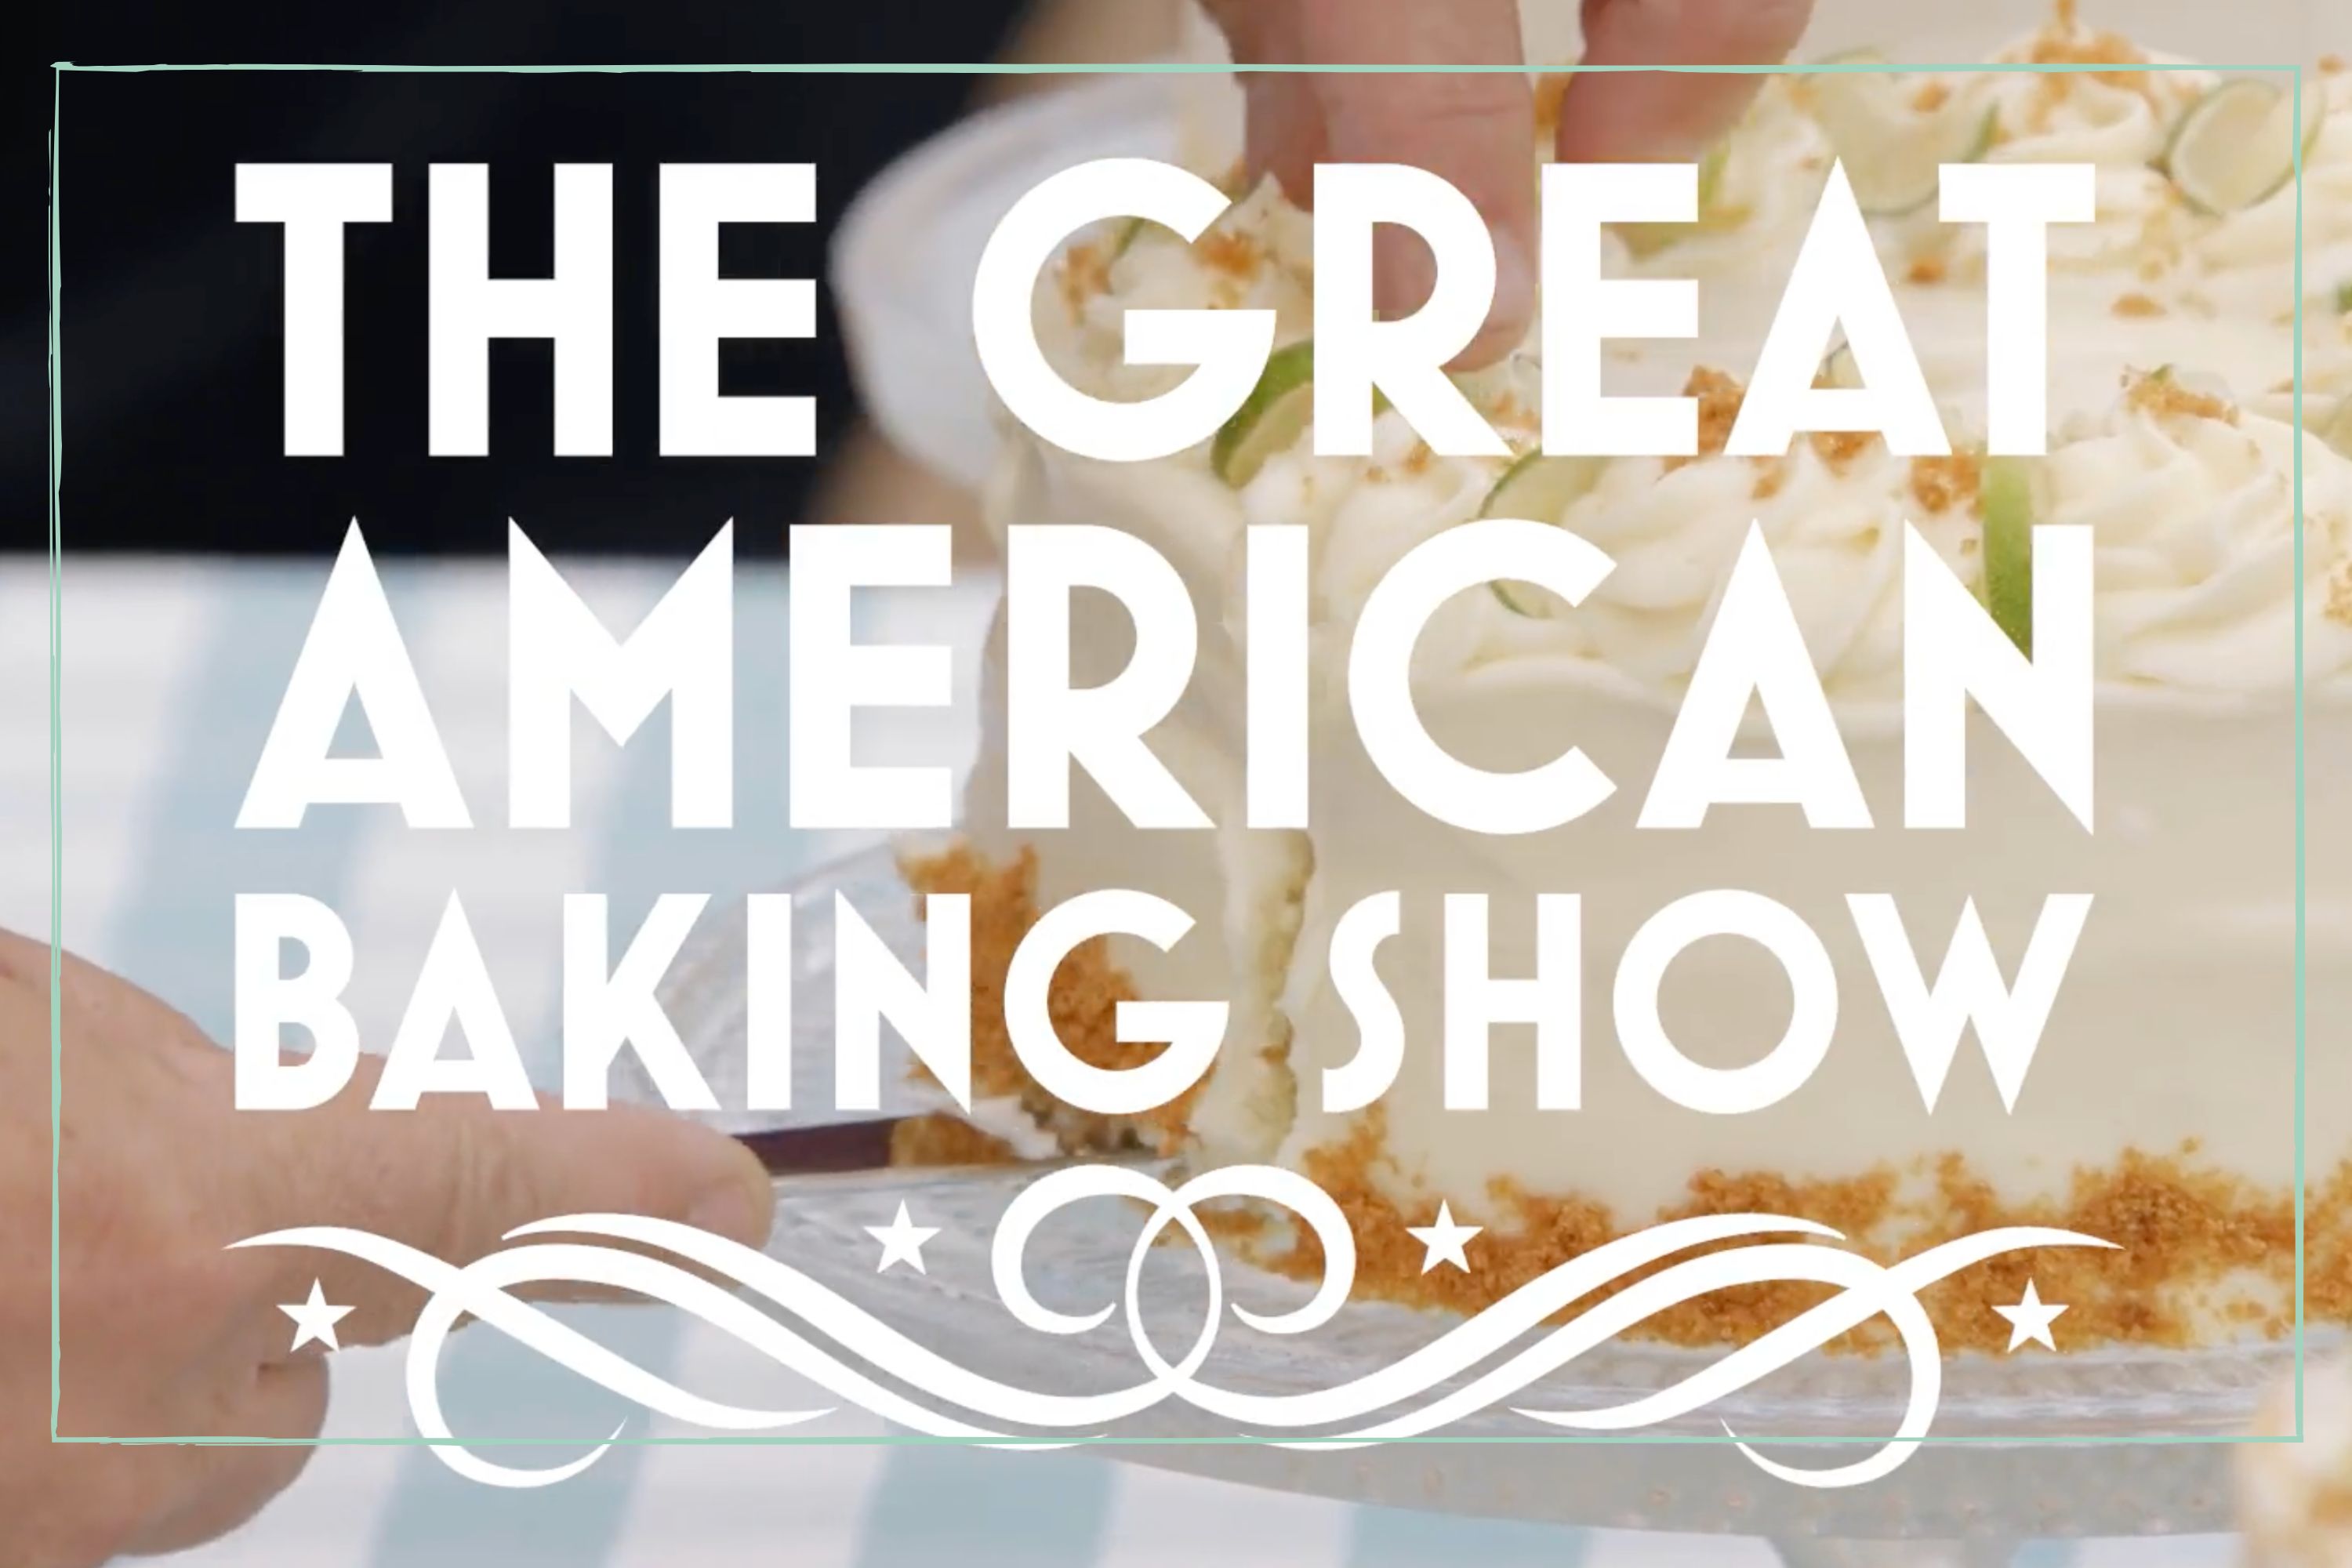 Everything we know about The Great American Baking Show